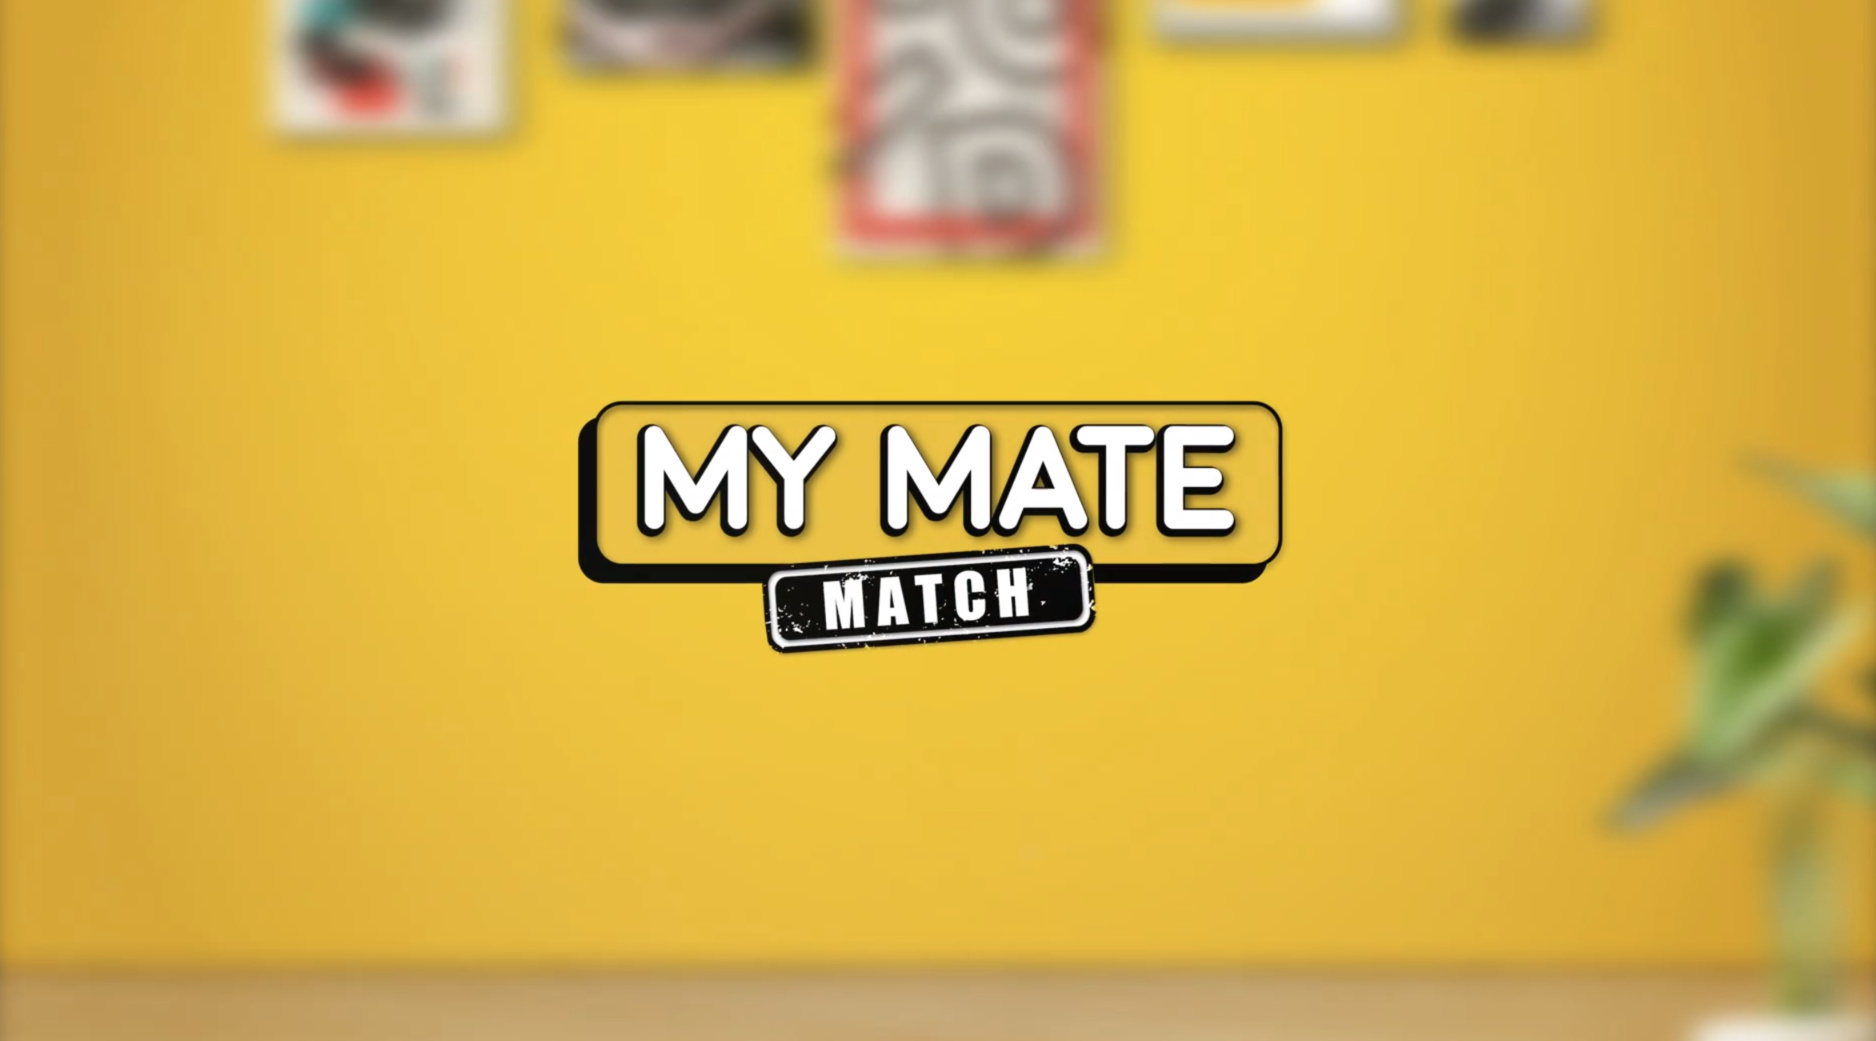 My mate match the series